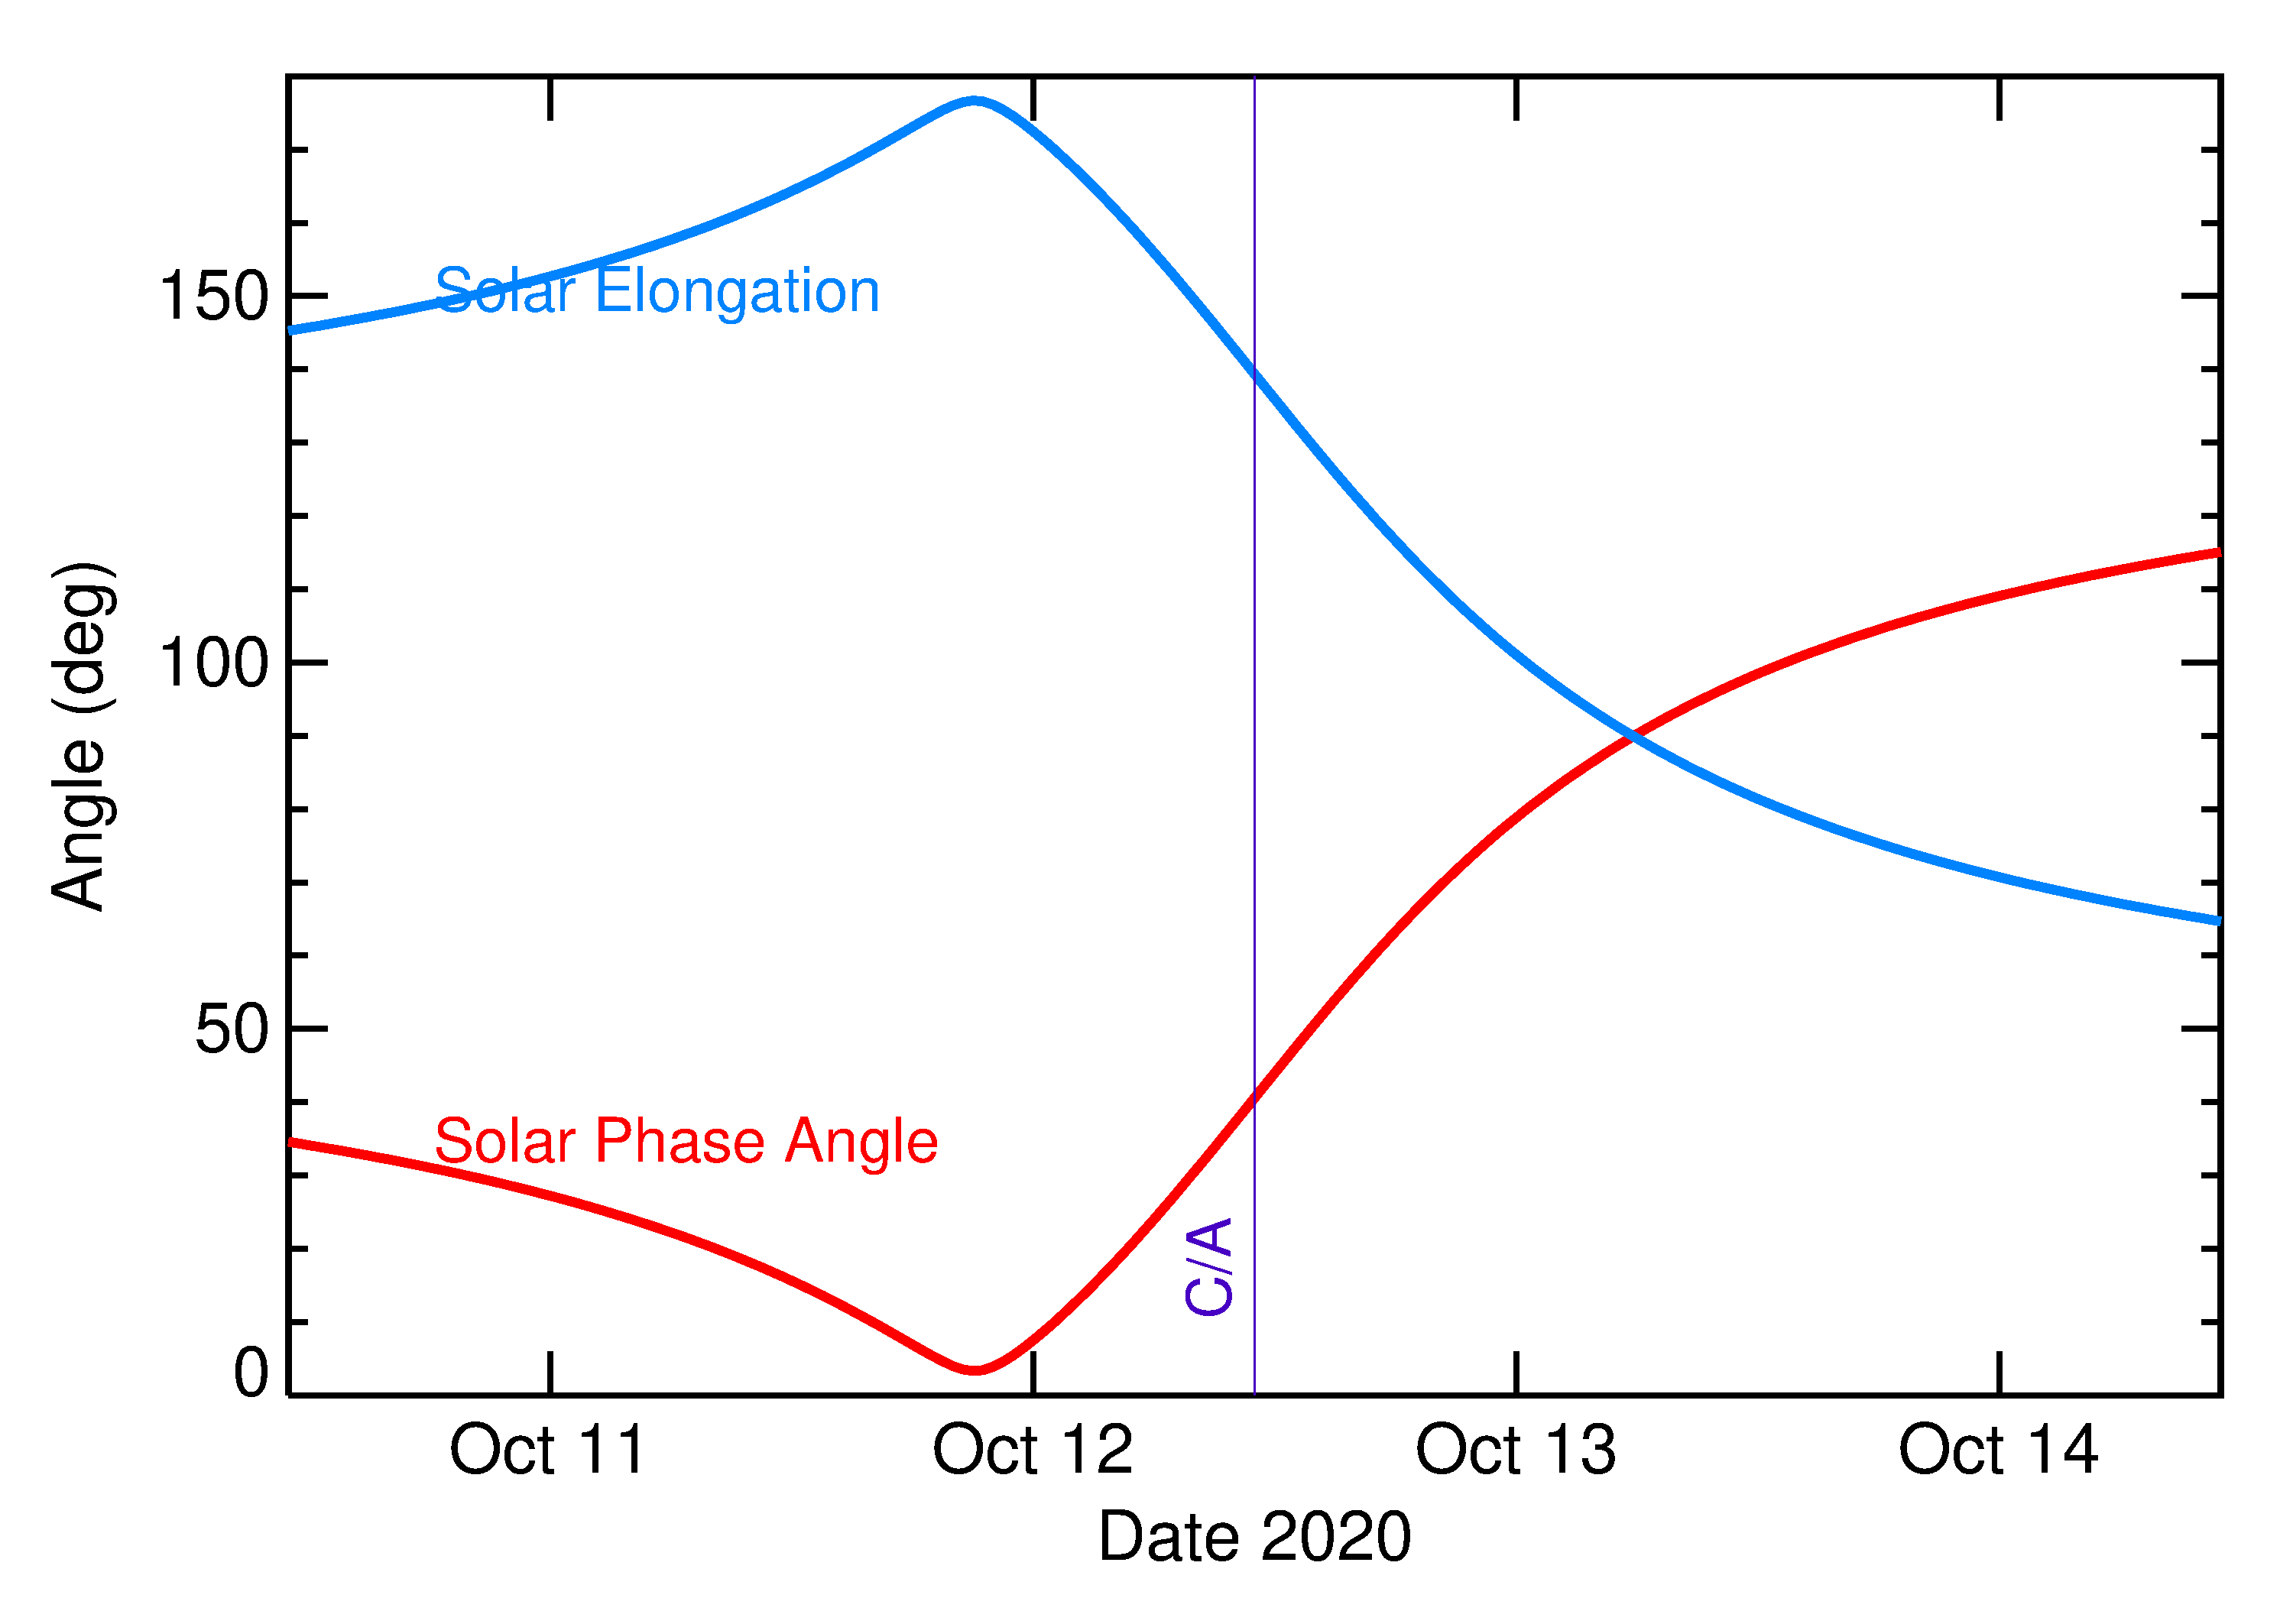 Solar Elongation and Solar Phase Angle of 2020 TS1 in the days around closest approach